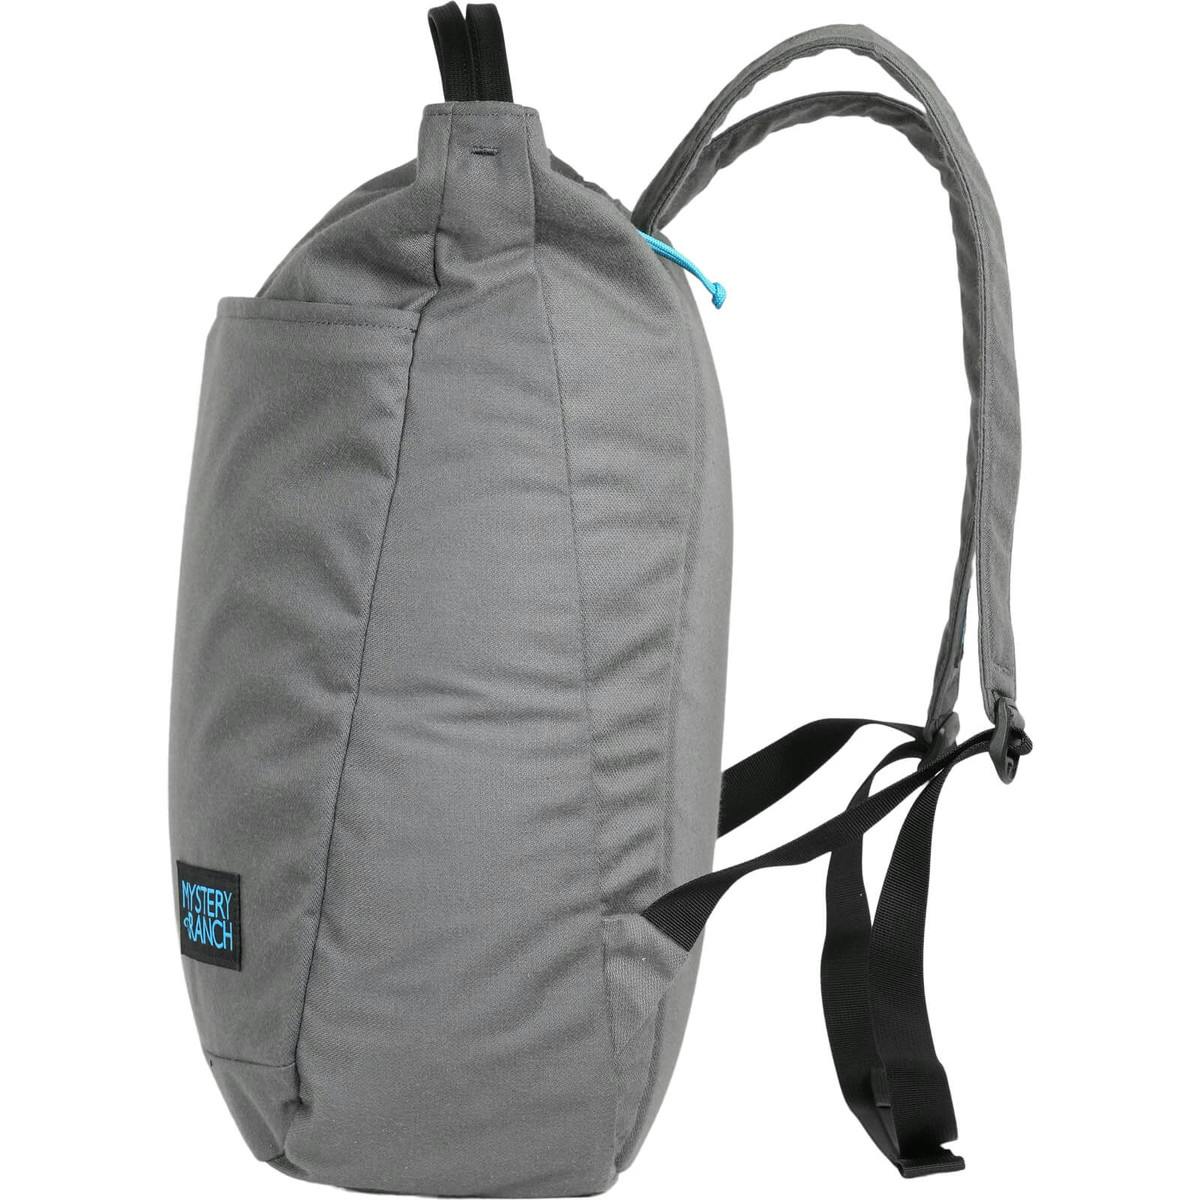 Mystery Ranch Super Market 22 Backpack · Shadow Moon